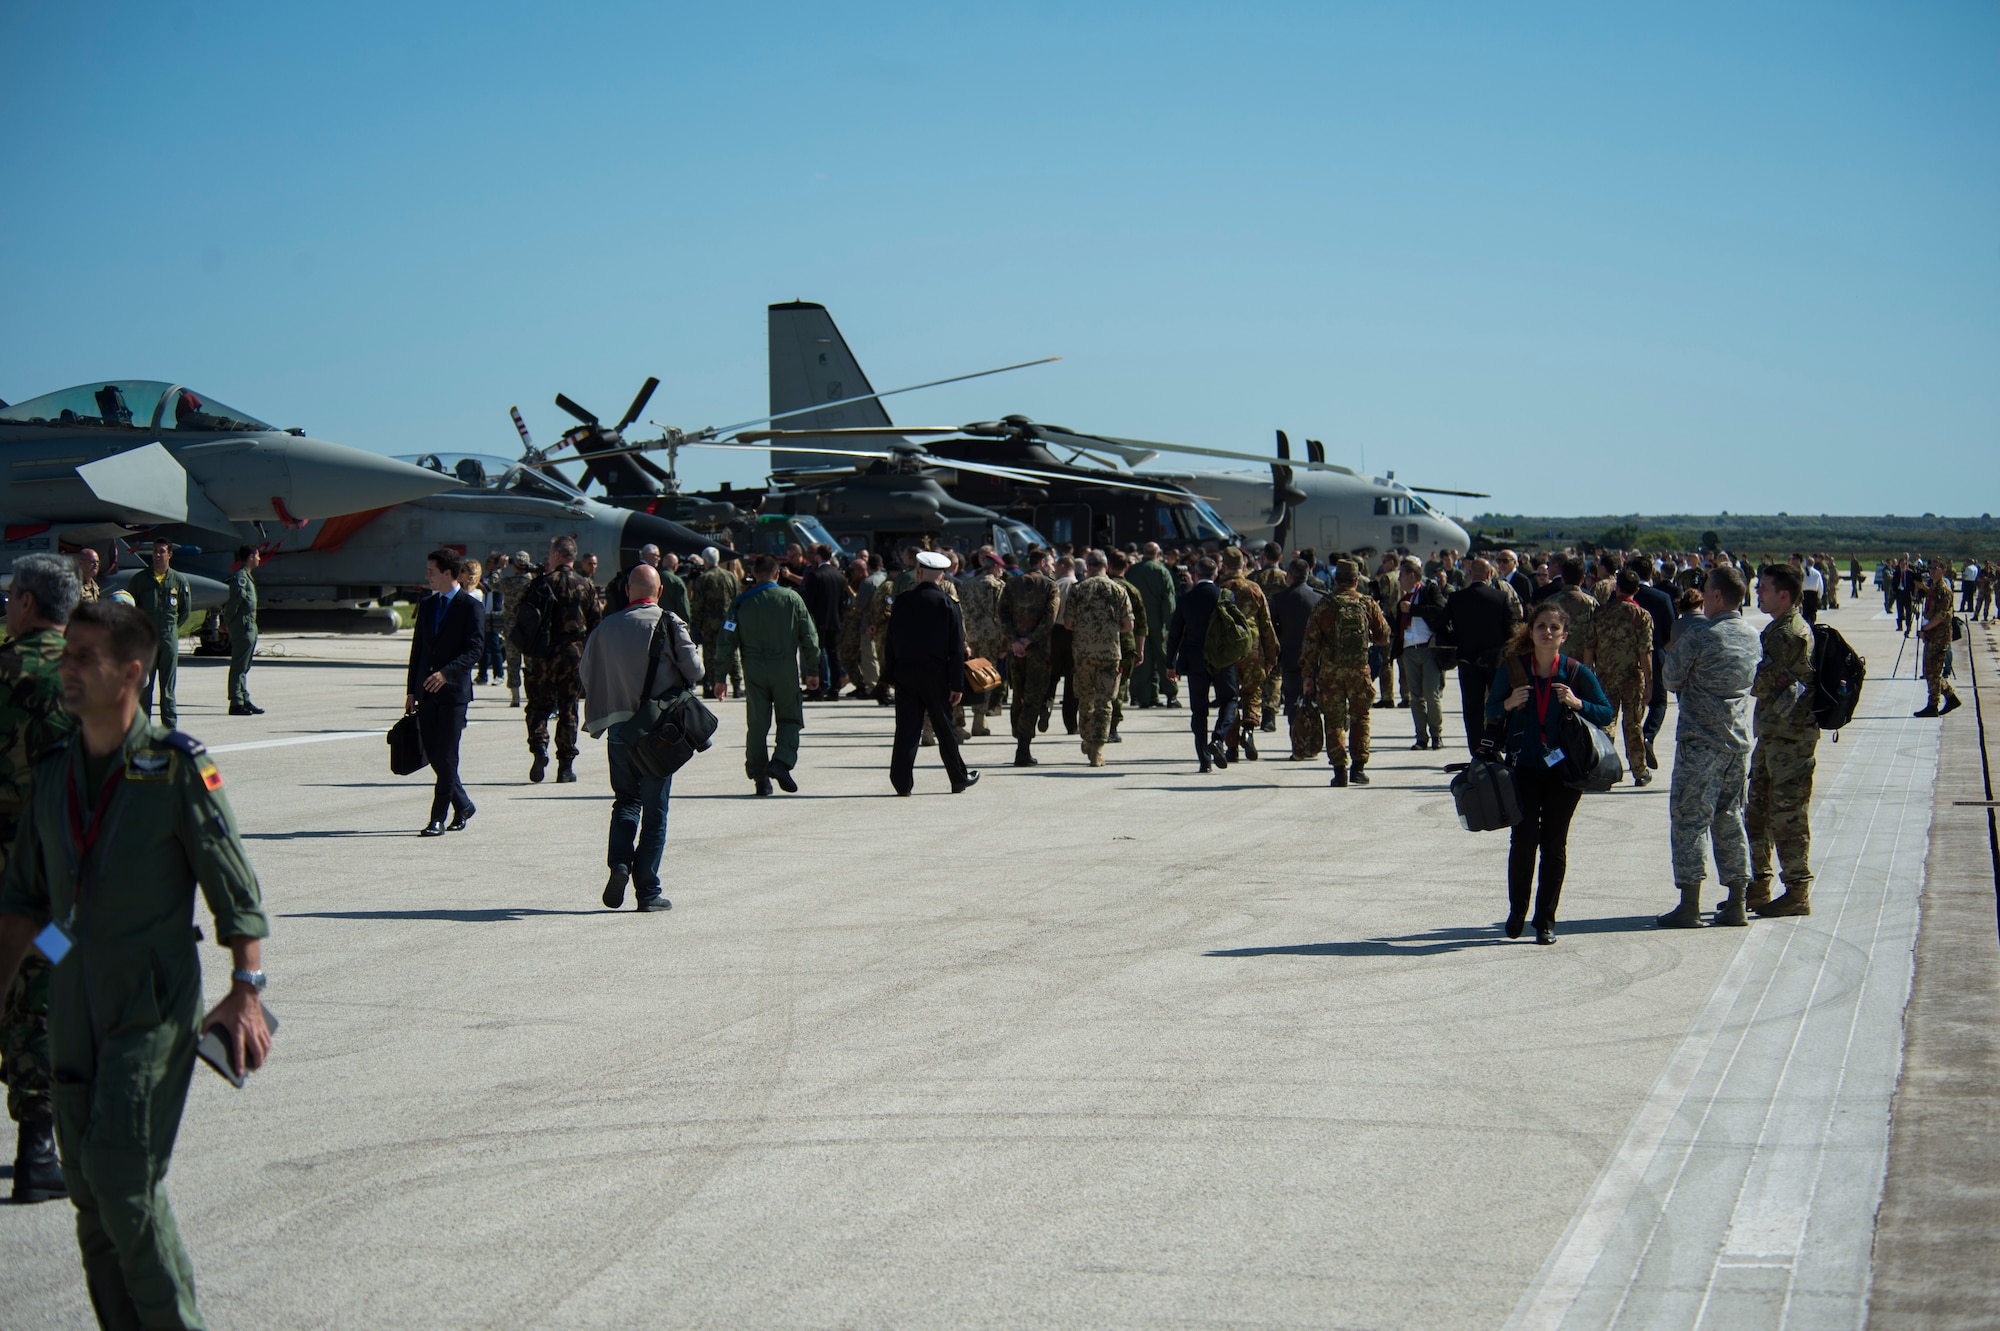 TRAPANI AIR BASE, Italy - Military members and media representatives from multiple nations observe static displays of aircraft during the Trapani Air Show at Trapani Air Base, Italy, Oct. 19, 2015. The Trapani Air Show kicked off Trident Juncture 2015, a training exercise involving more than 30 Allied and Partner Nations taking place throughout Italy, Portugal, Spain, the Atlantic Ocean, the Mediterranean Sea, Canada, Norway, Germany, Belgium and the Netherlands. (U.S. Air Force photo by Airman 1st Class Luke Kitterman/Released)